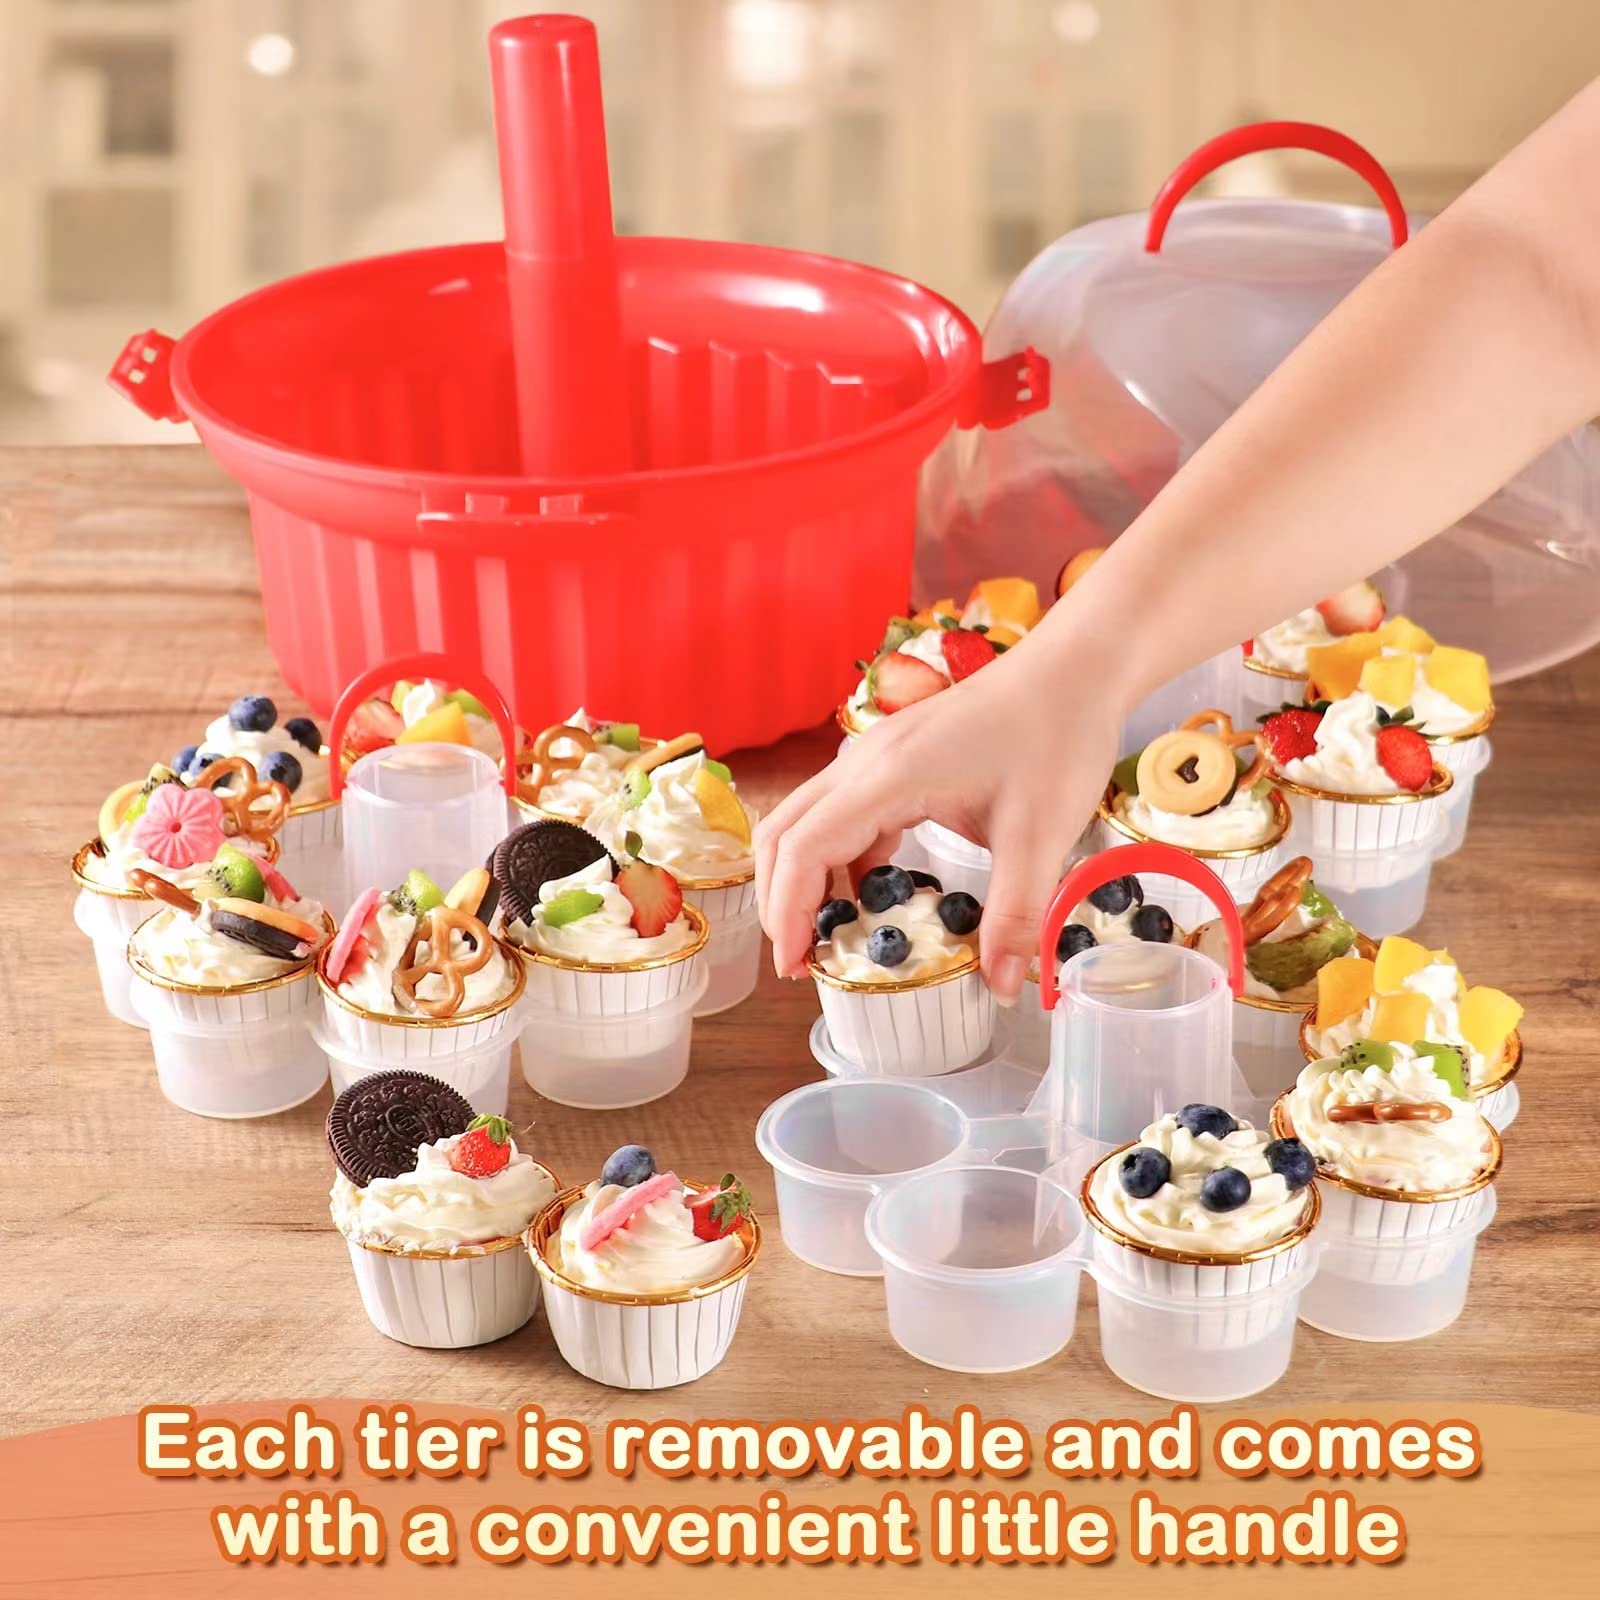 Wehome 3-Tier Cupcake Carrier,Cupcake Holder with Lid and Handle for 24 Cupcakes,Portable Cupcake Holder Cookie Carrier，Cupcake Transport&Storage Container，Christmas Baking Gifts for Bakers